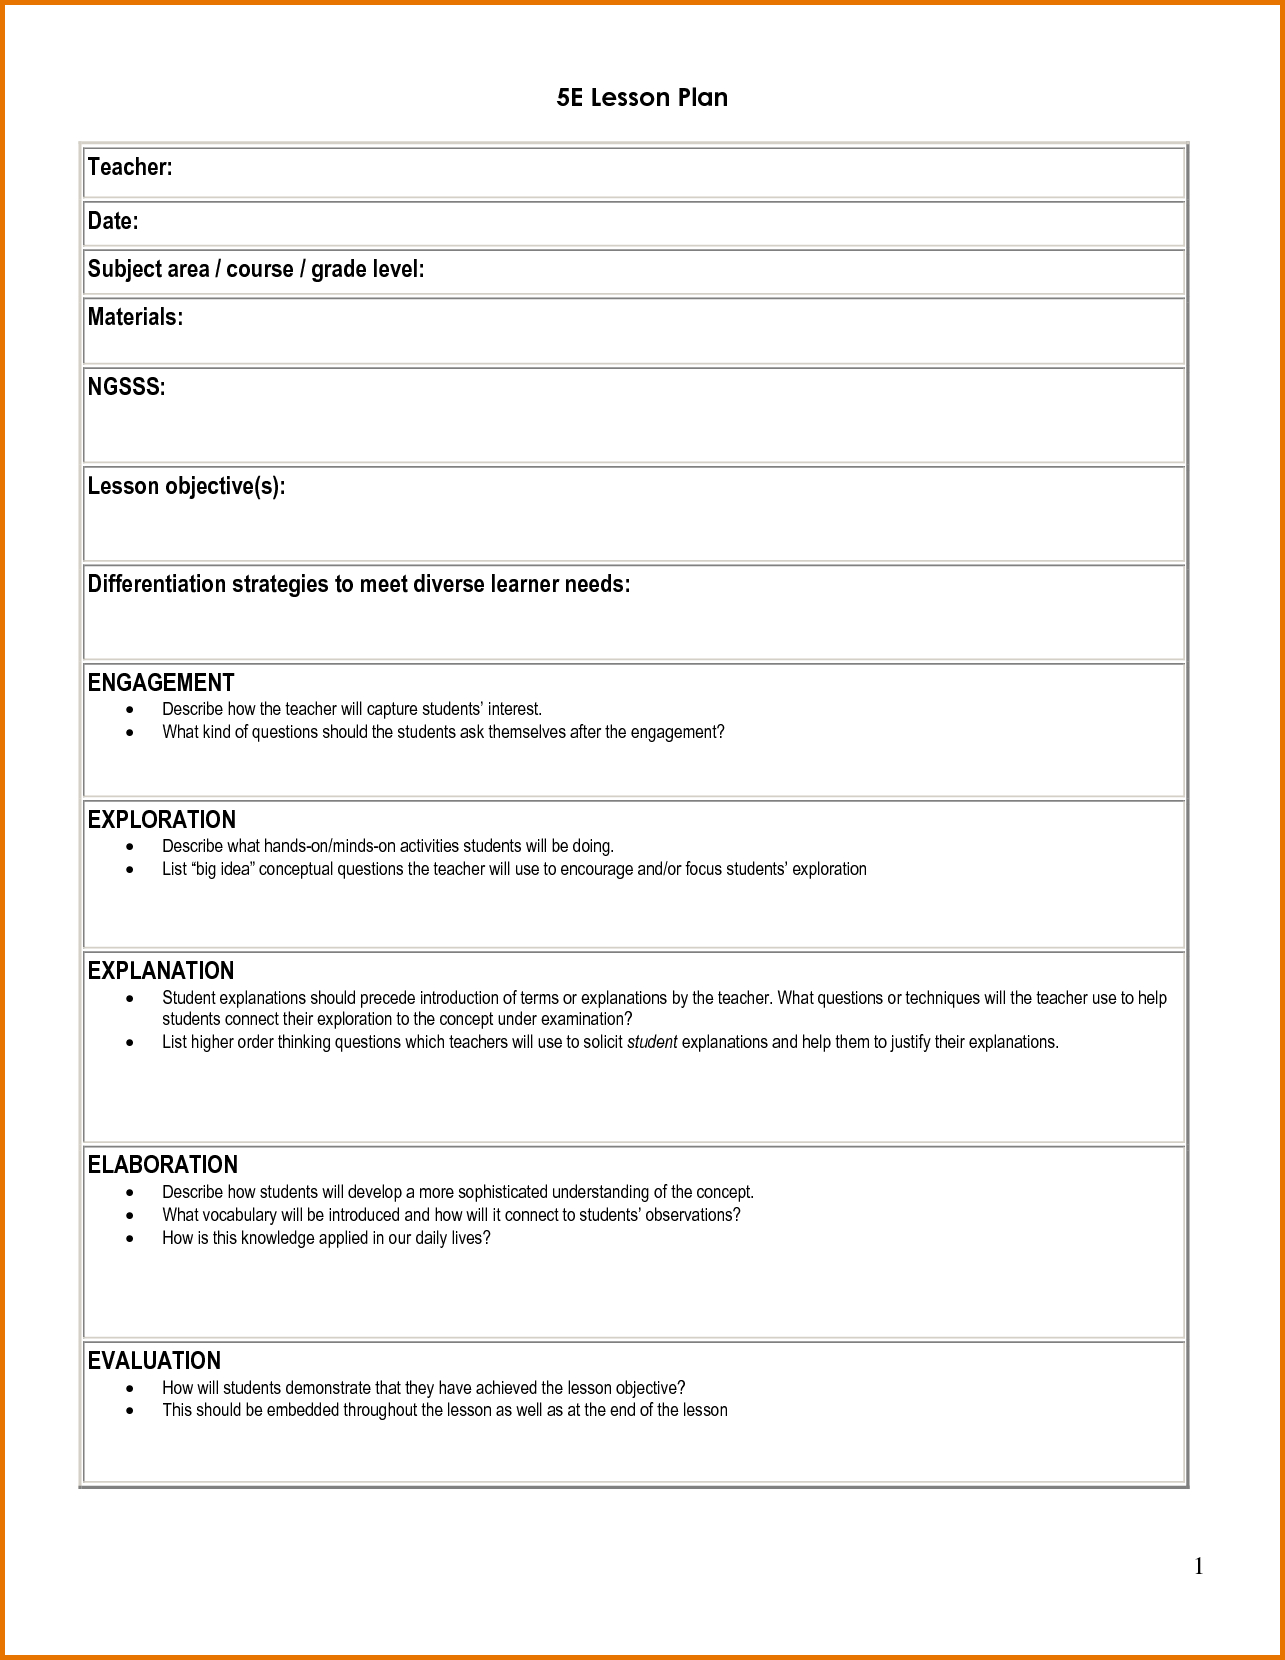 5E Student Lesson Planning Template - Download As Doc